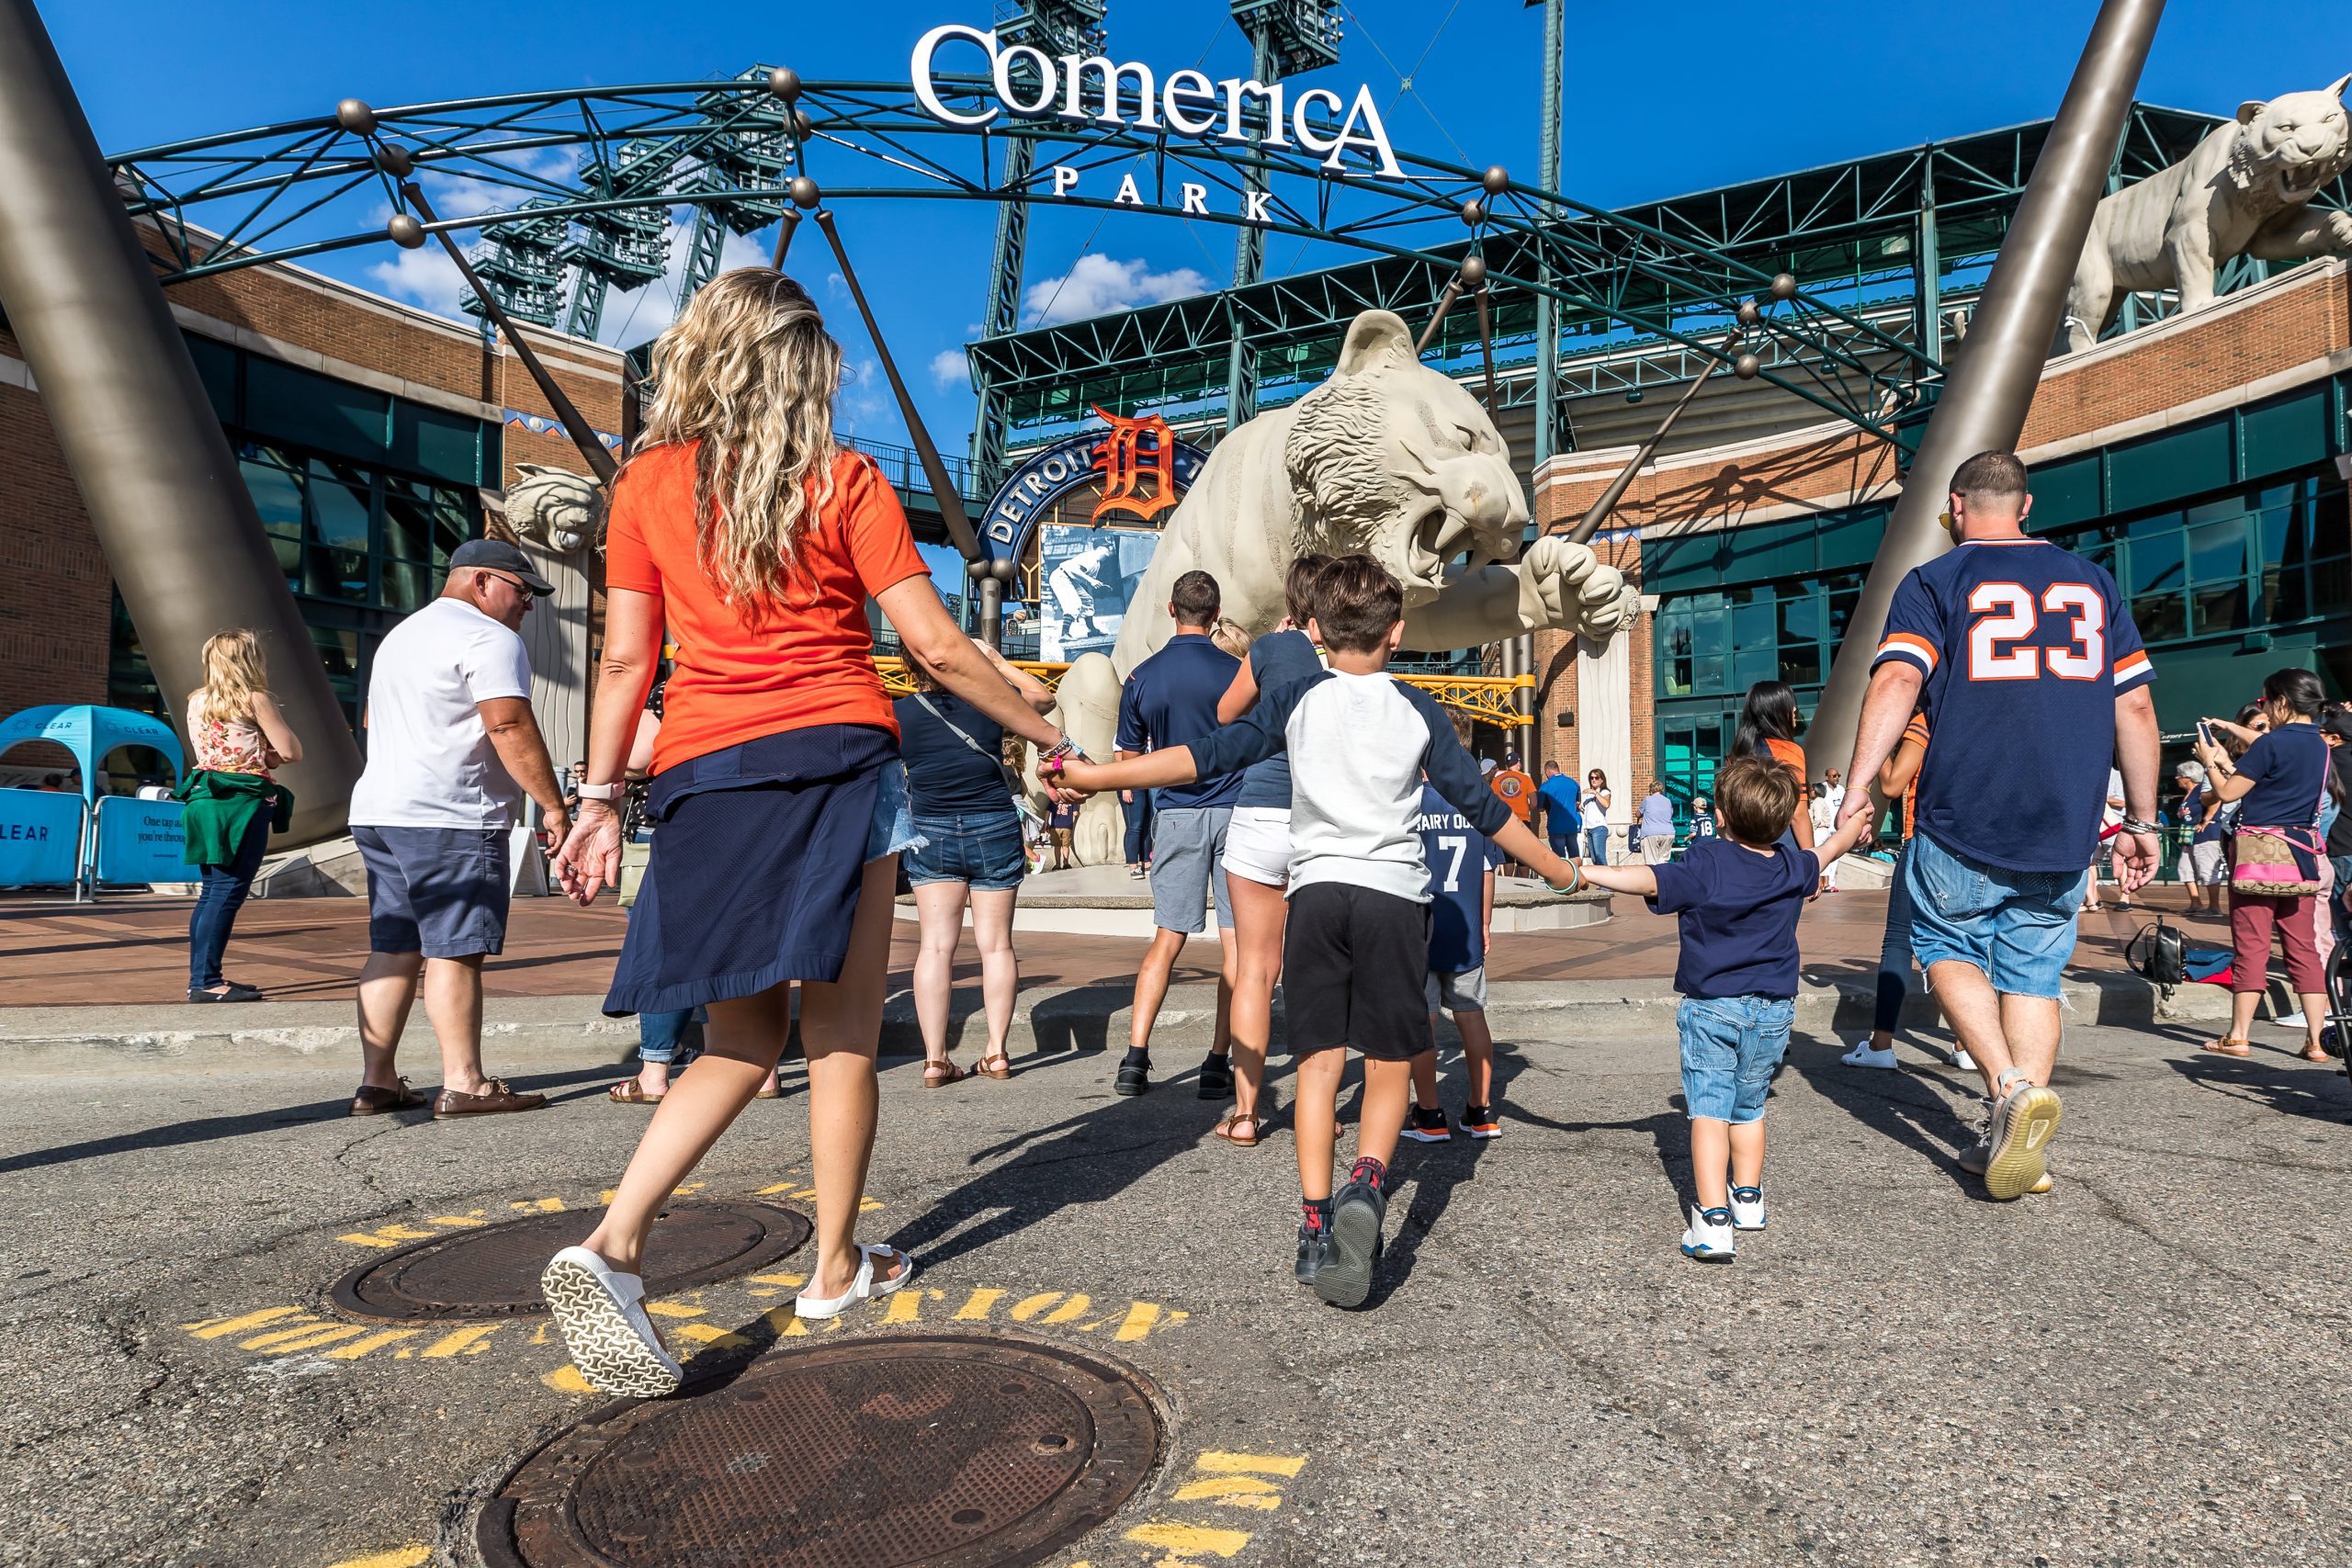 New rules at Comerica Park: What you can and can't take to the